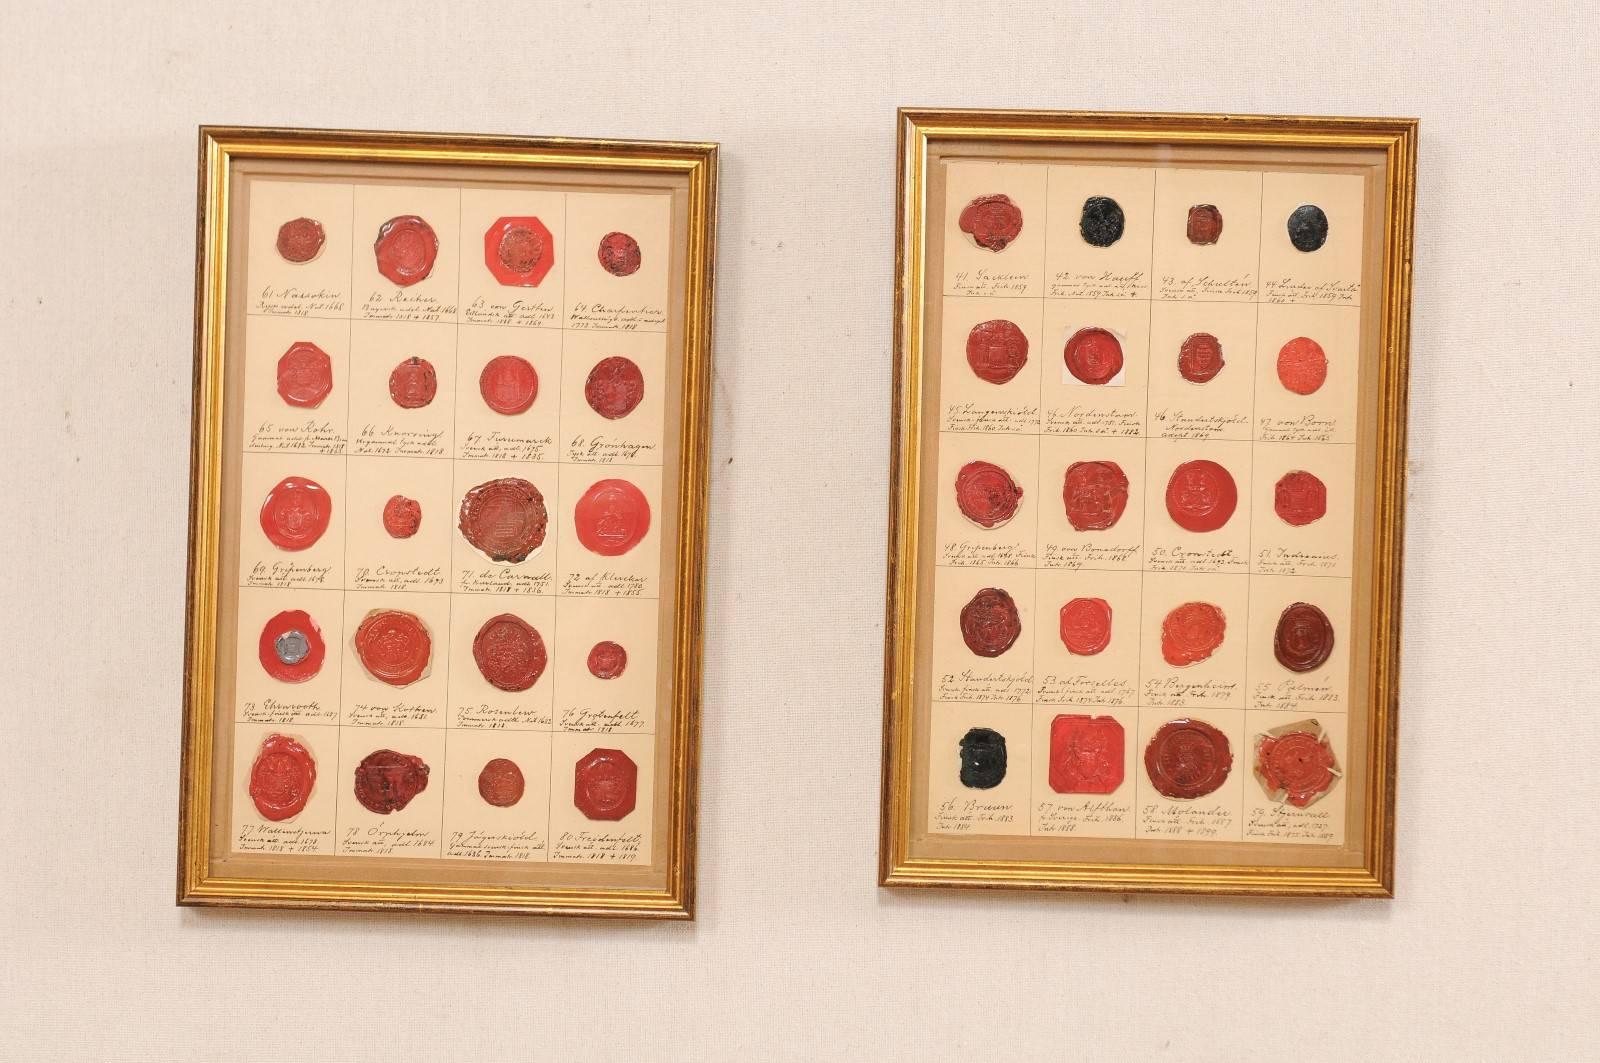 A pair of authentic early 19th century Swedish framed seals. These antique seals of Swedish nobility, have been set in custom bronze and gold toned frames. This set of seals are primarily in various shades of red, with a few black seals. Please note